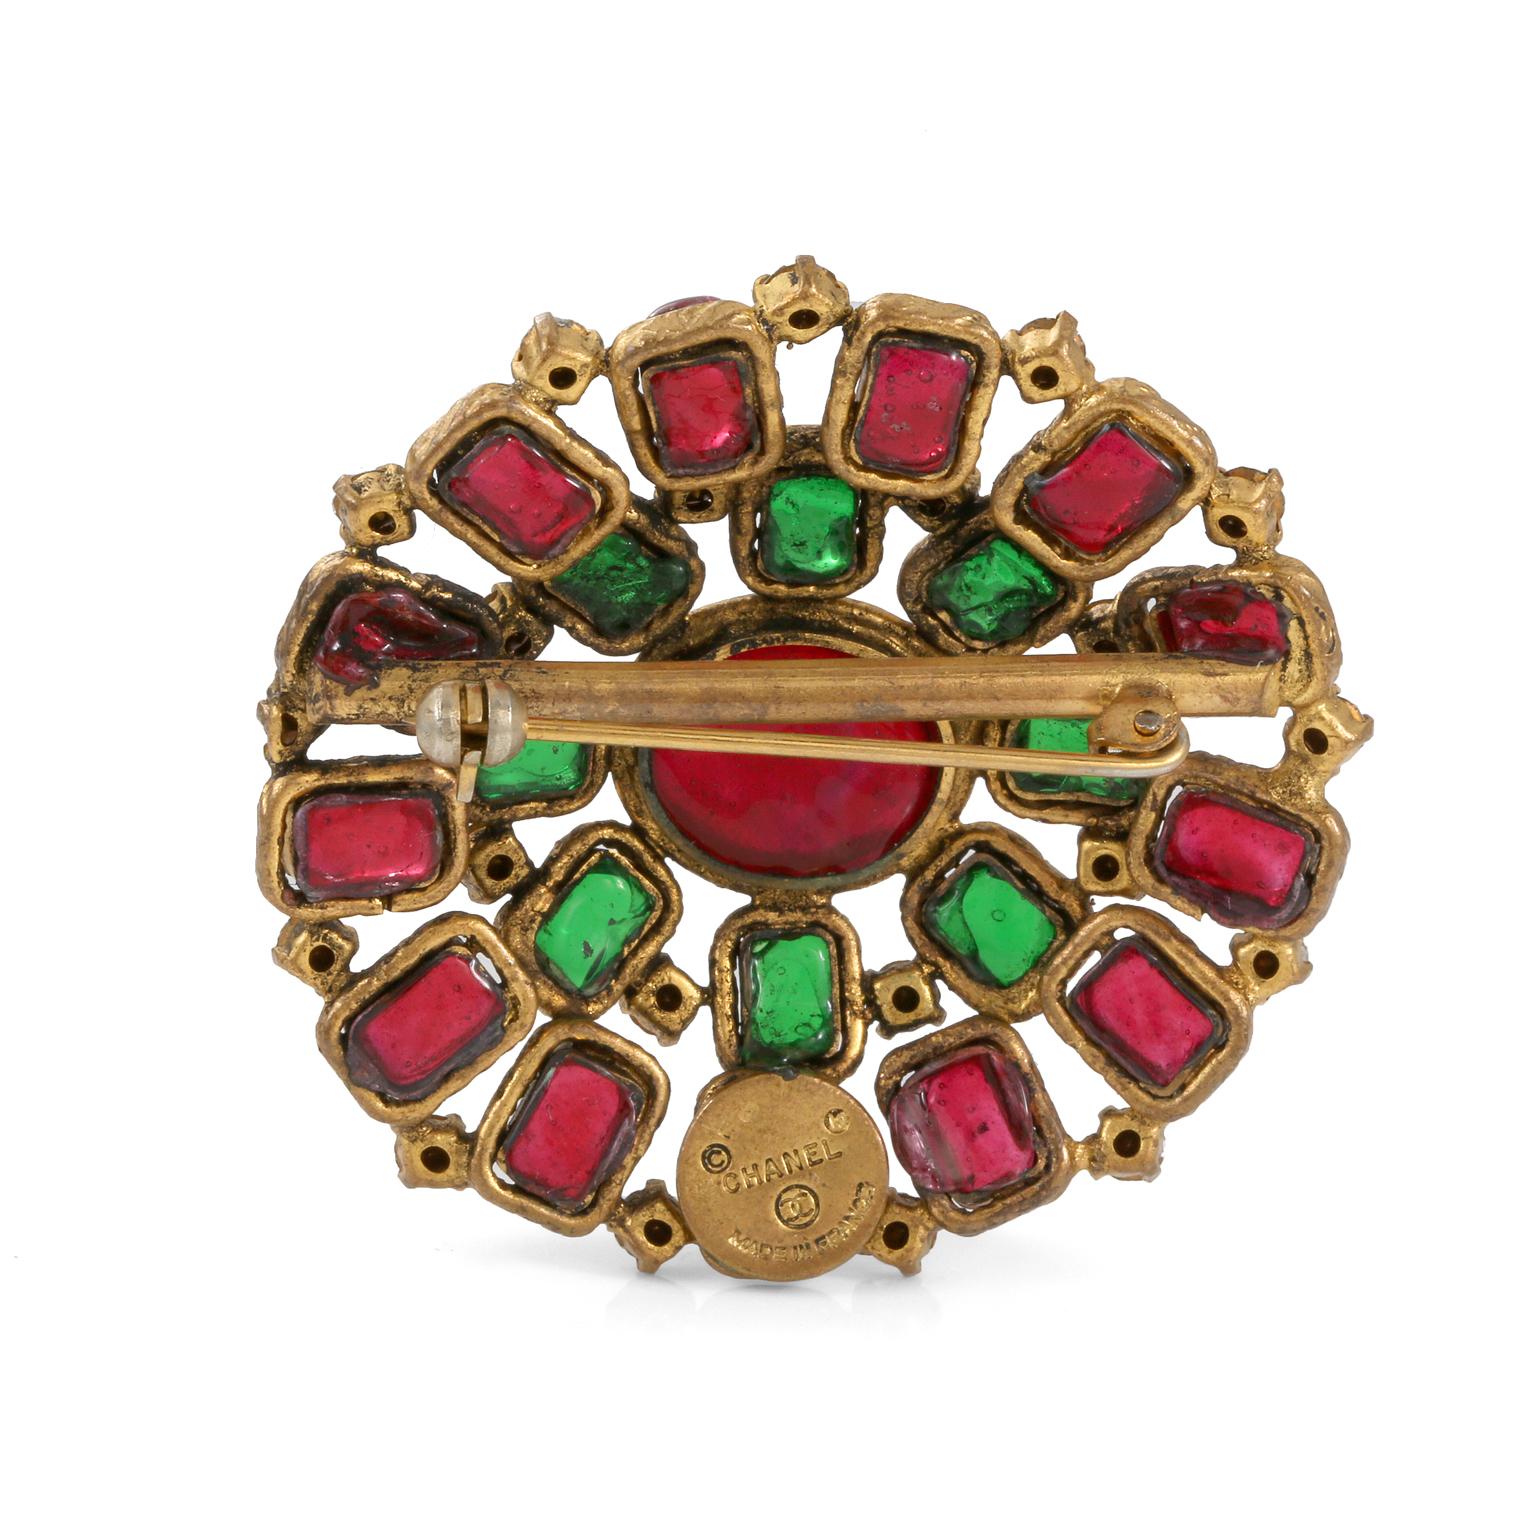 This authentic Chanel Gripoix Starburst Brooch is in exceptionally good vintage condition from the 1970’s.  Red and green Gripoix glass stones are interspersed with crystal gemstones in this radial design.  Made in France. Pouch or box included.

 
